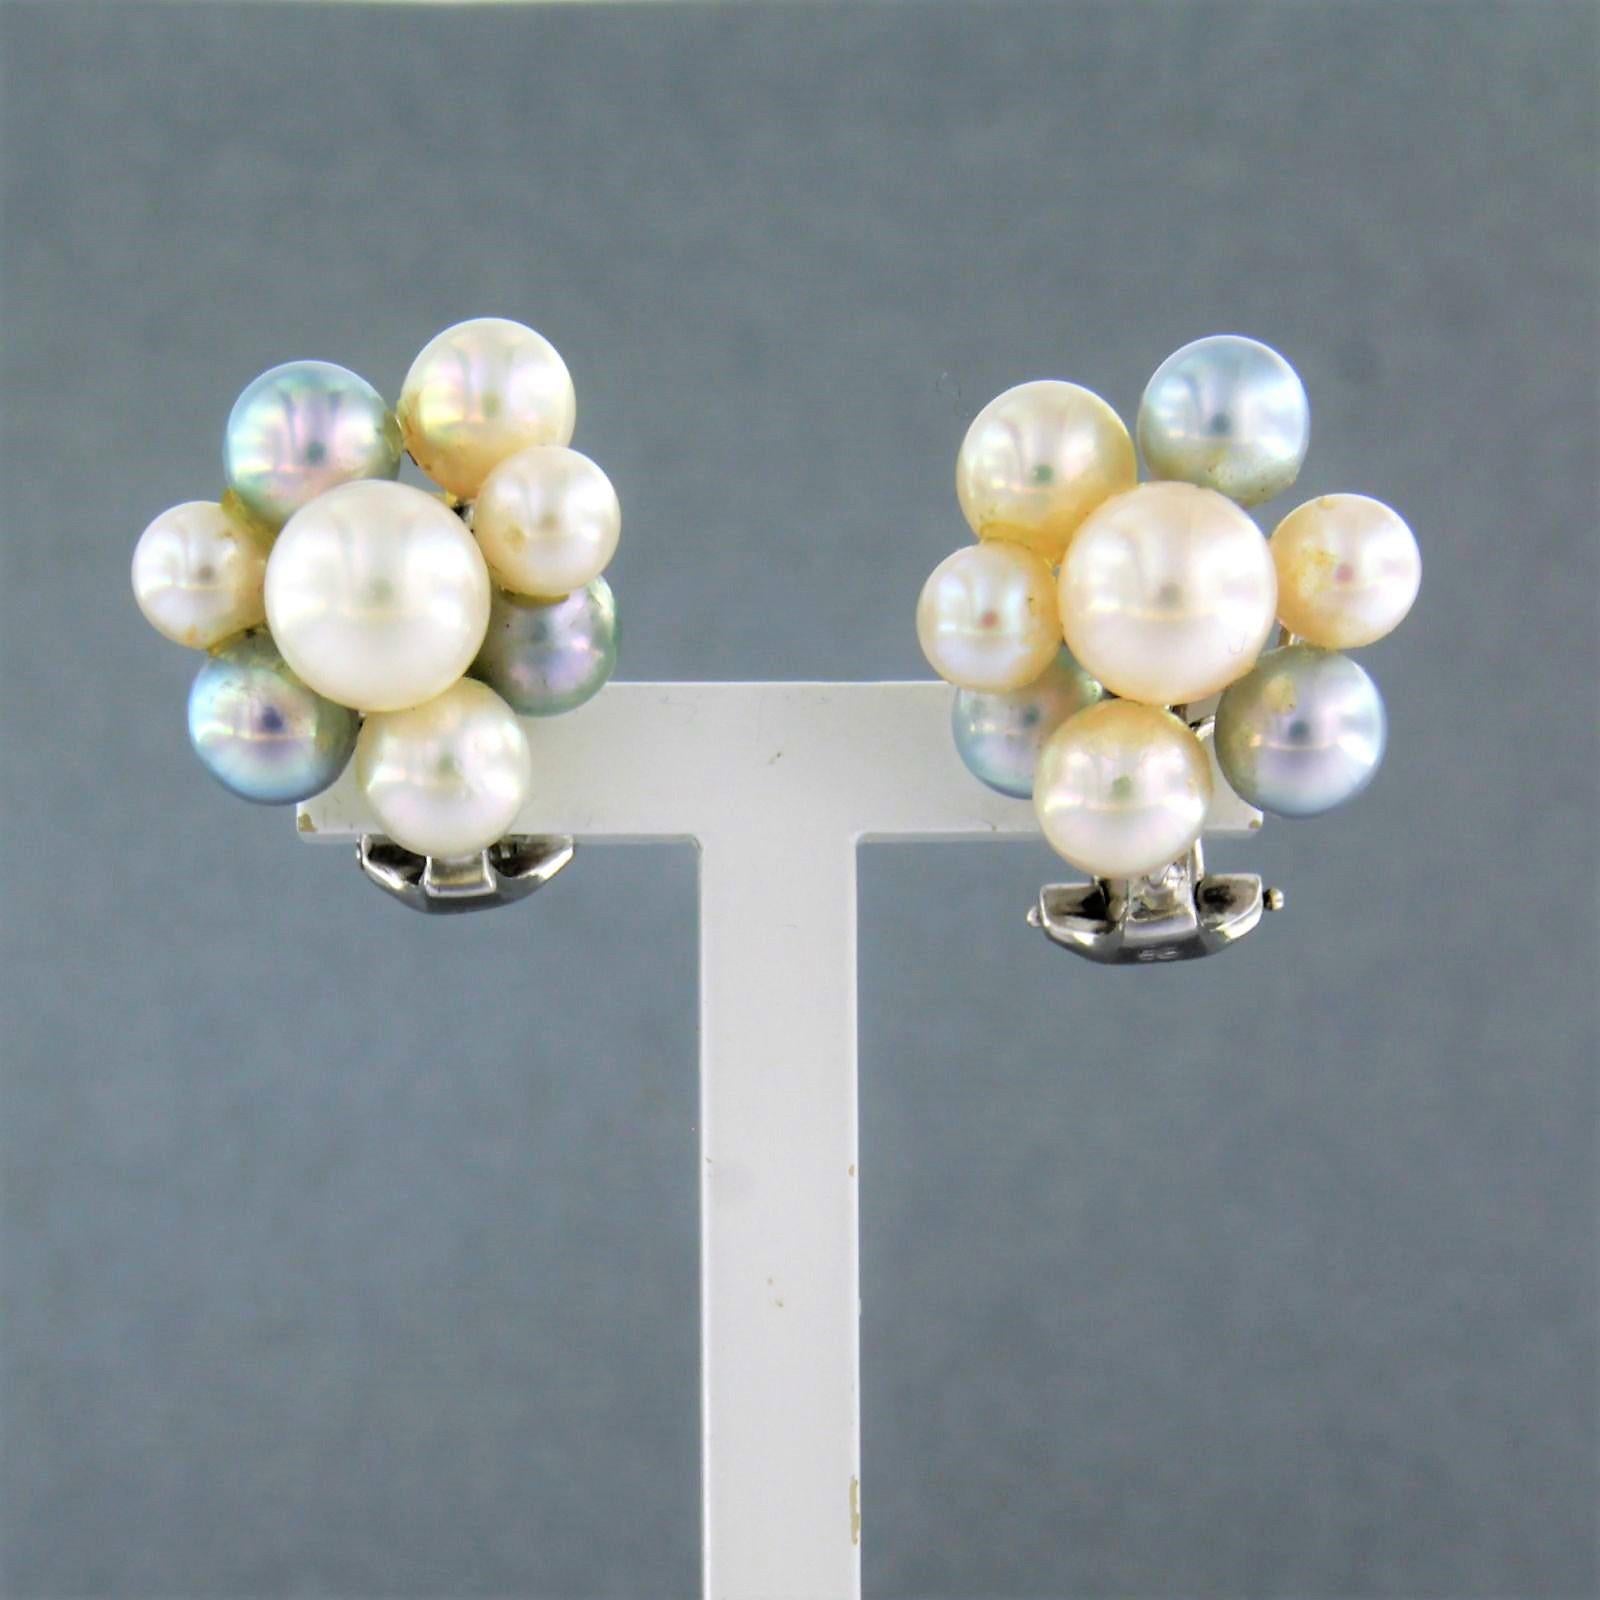 18k white gold ear clips set with pearl

detailed description:

Dimensions of the ear clips are 1.6 cm high and 1.5 cm wide

weight: 7.4 grams

occupied with

- 6 x 5.0 mm - 5.5 mm gray blue freshwater cultured pearls

- 10 x 4.5 mm - 6.5 mm white